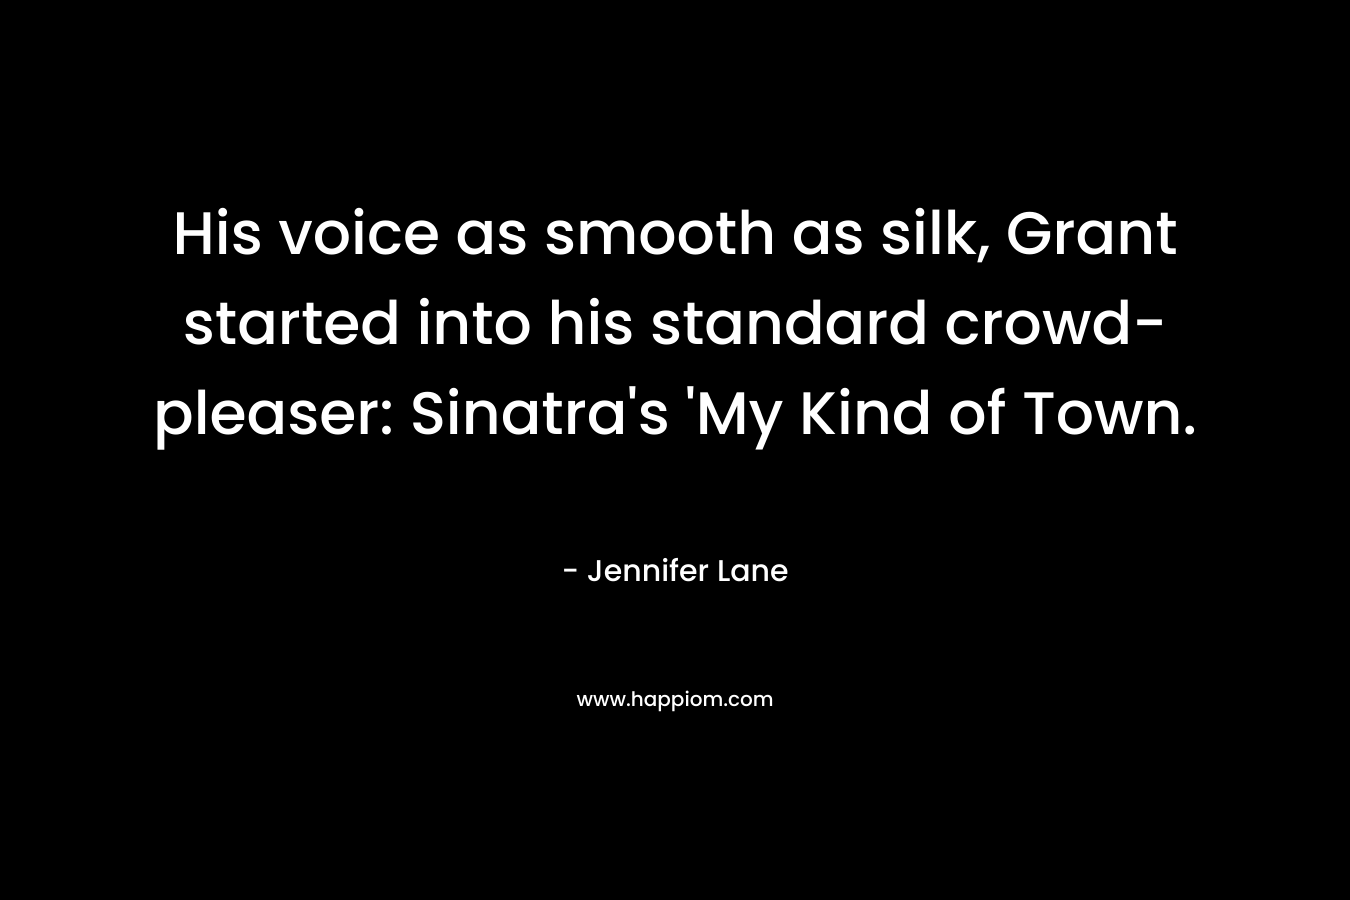 His voice as smooth as silk, Grant started into his standard crowd-pleaser: Sinatra's 'My Kind of Town.